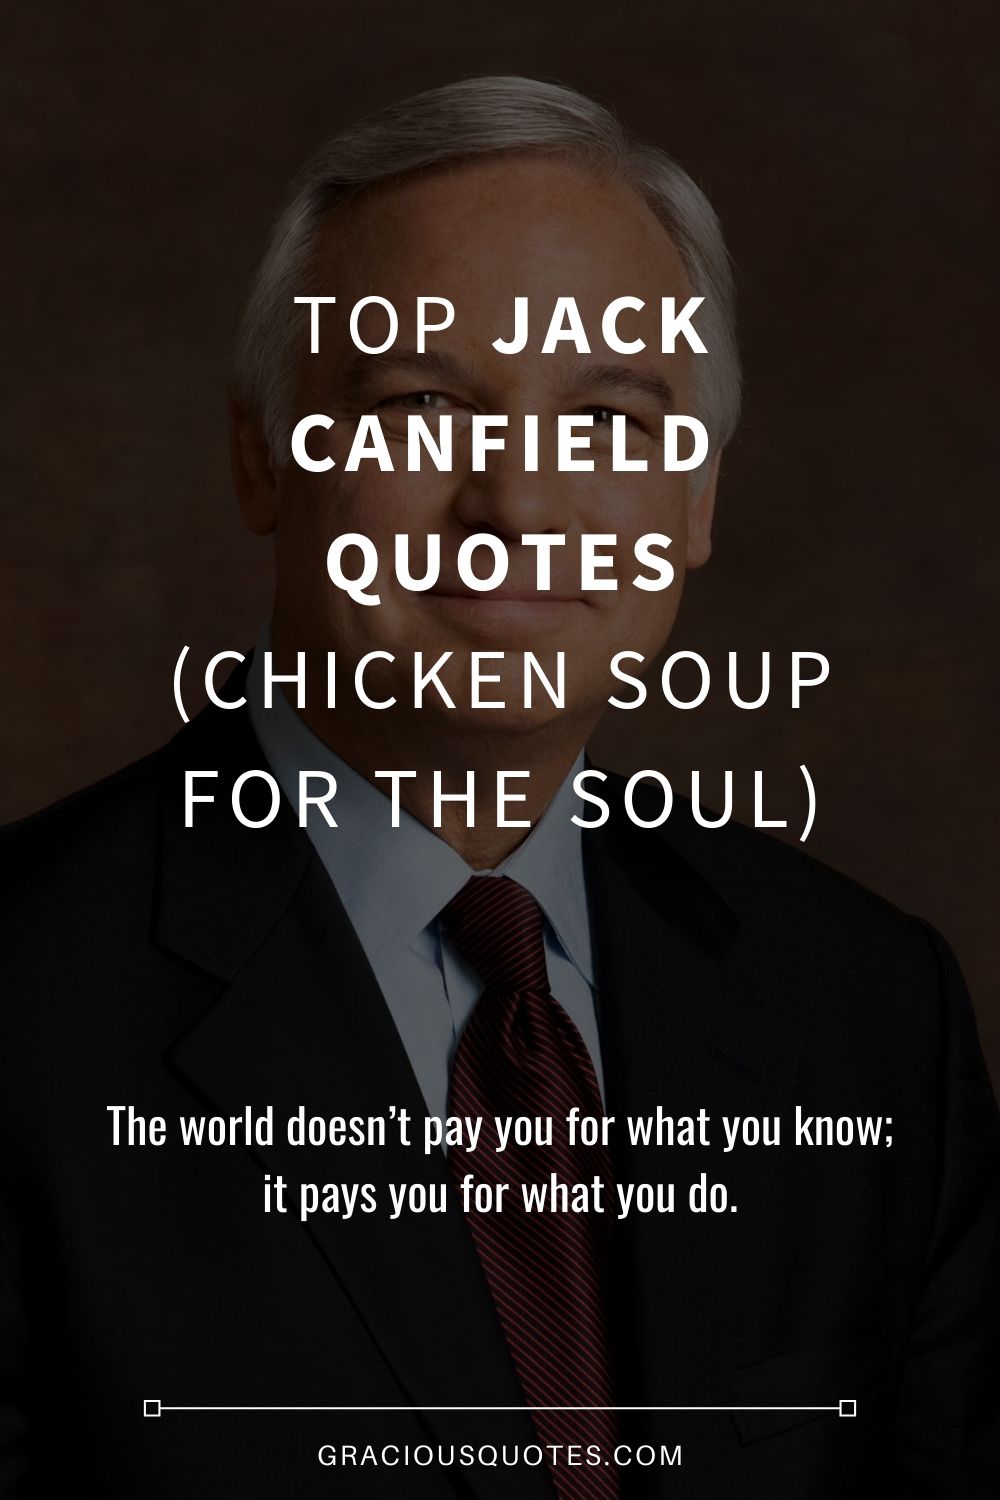 Top-Jack-Canfield-Quotes-Chicken-Soup-for-the-Soul-Gracious-Quotes